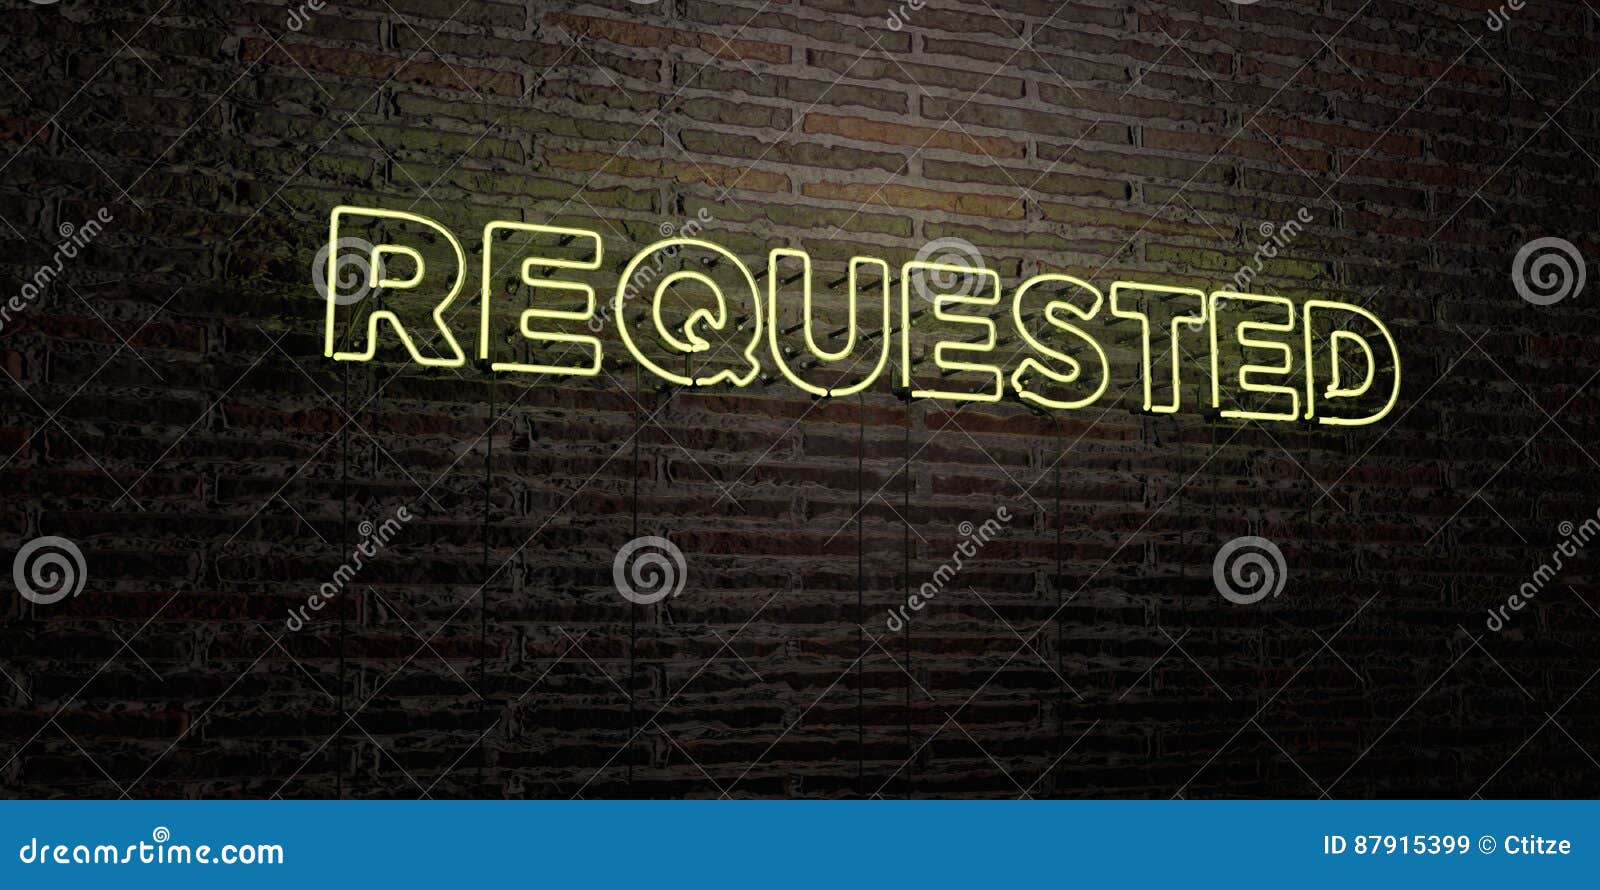 requested -realistic neon sign on brick wall background - 3d rendered royalty free stock image